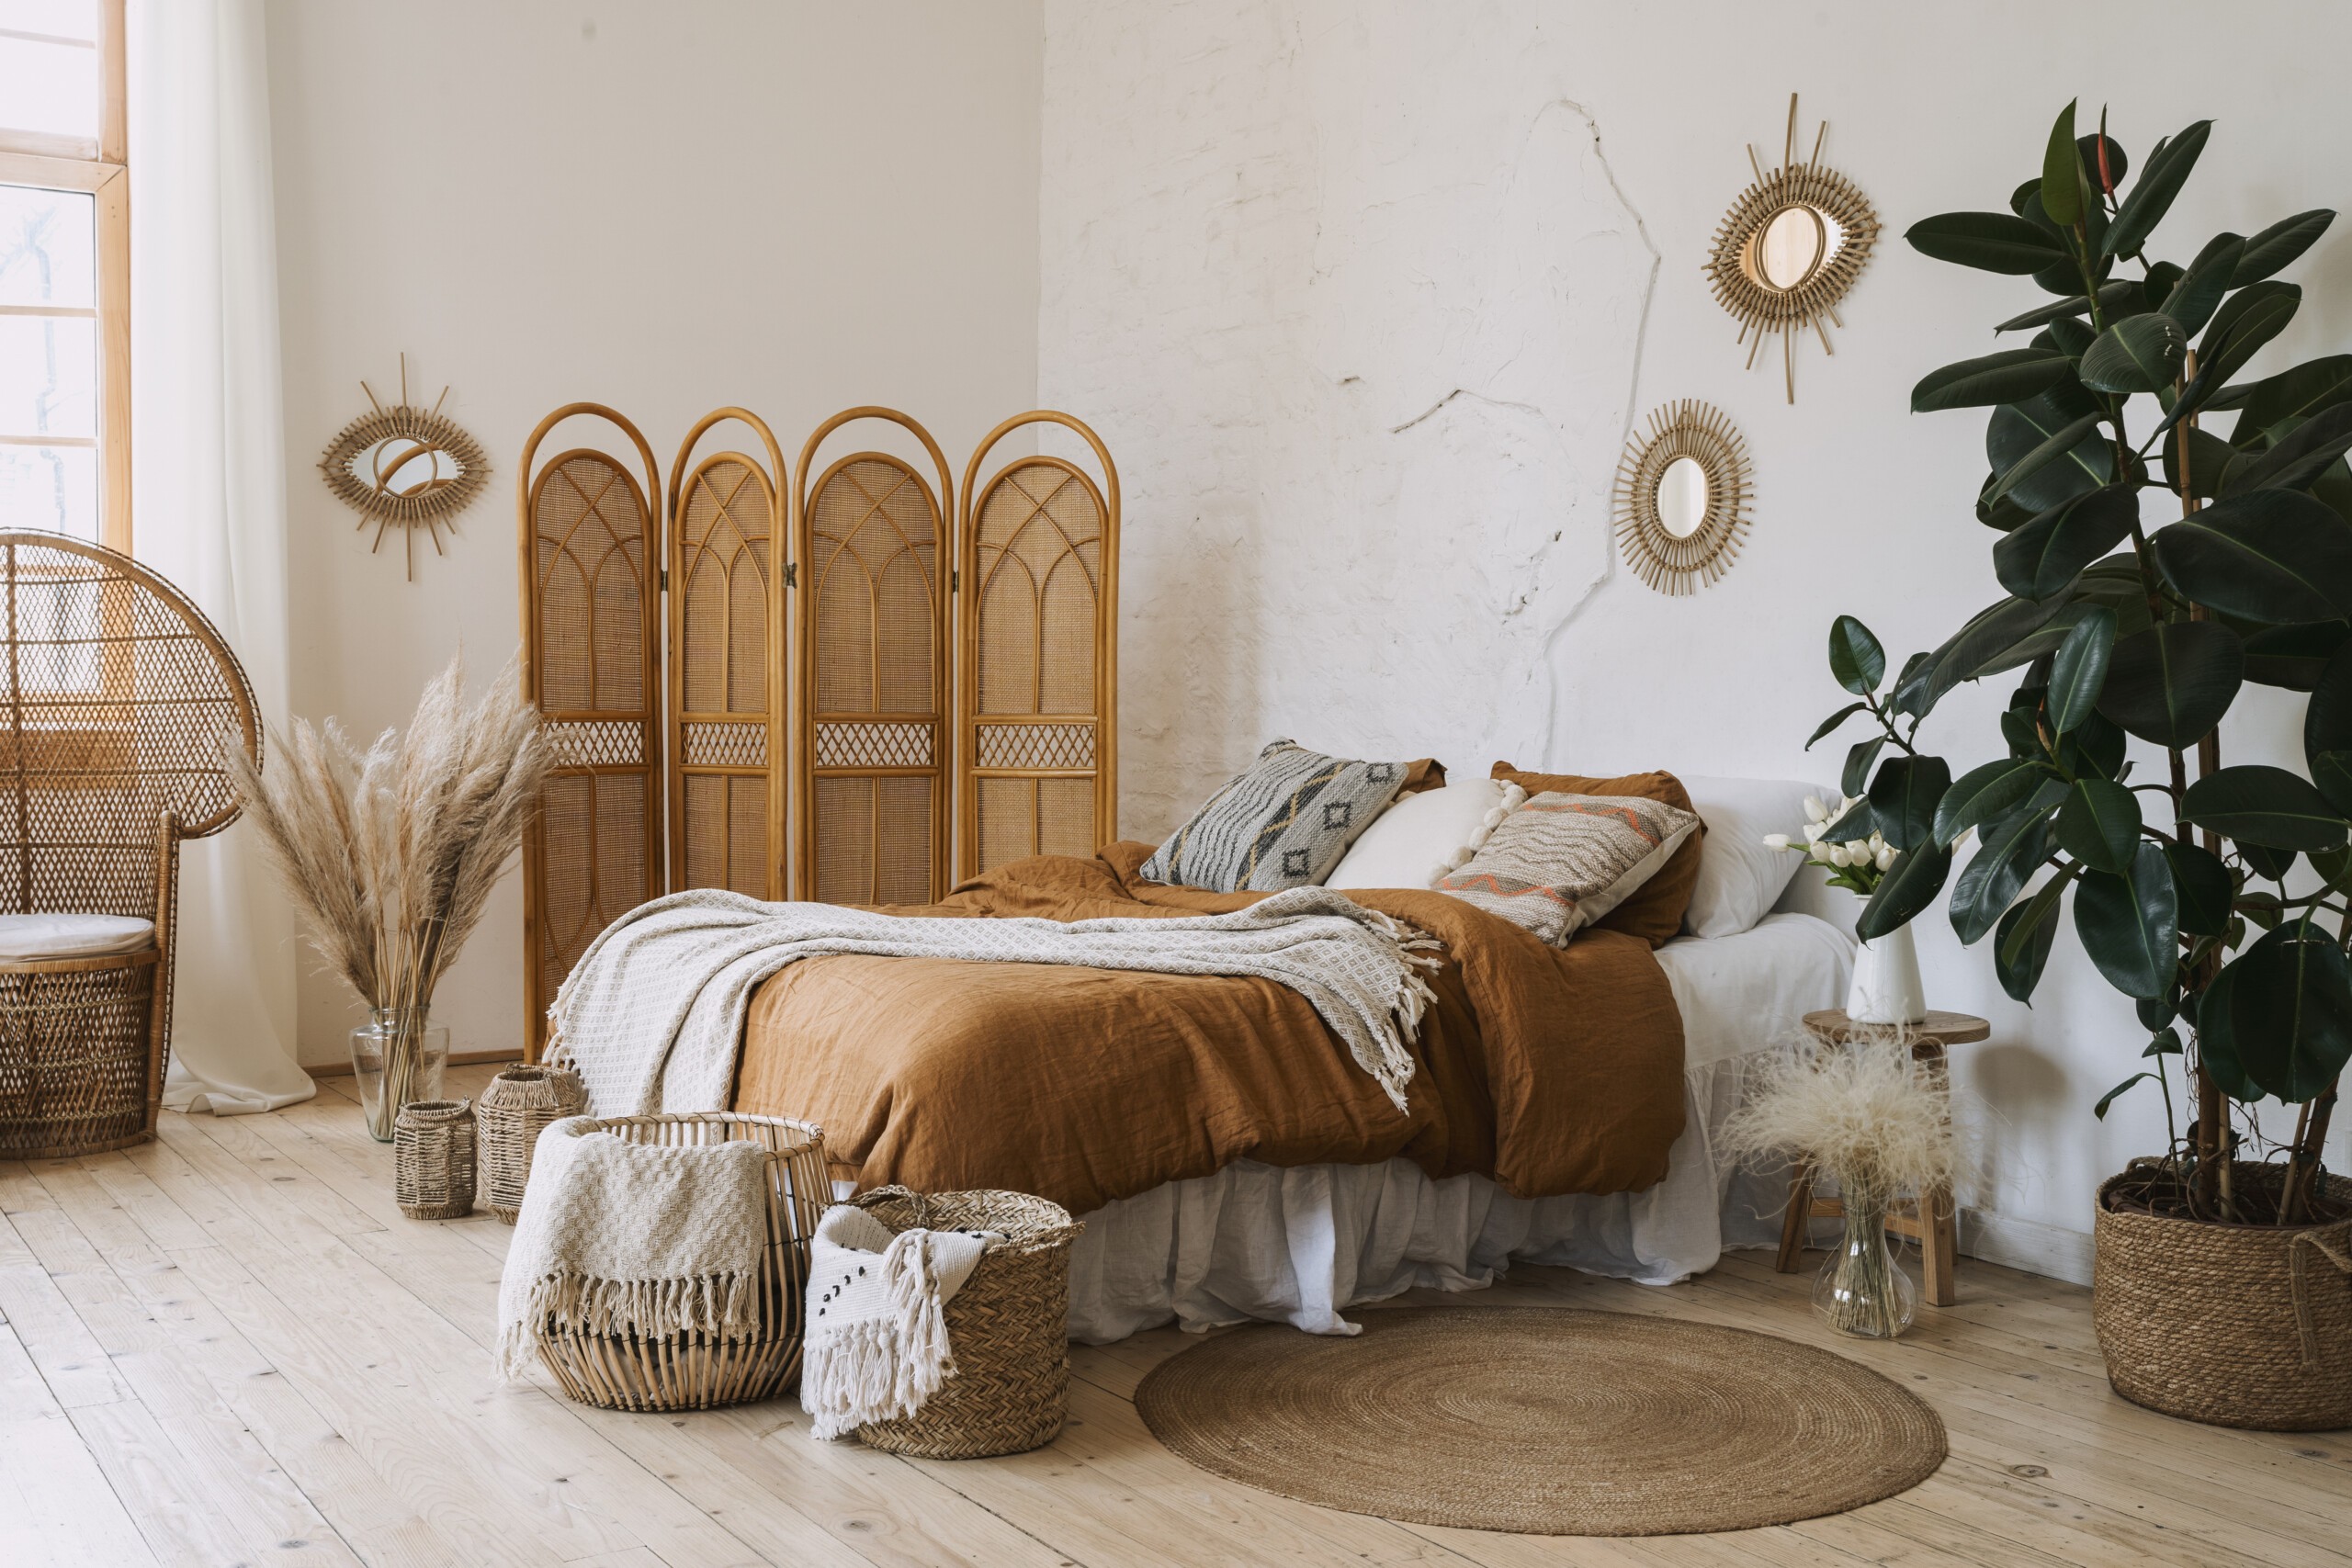 Bohemian Design Style: What It Means And How To Get The Look - Décor Aid